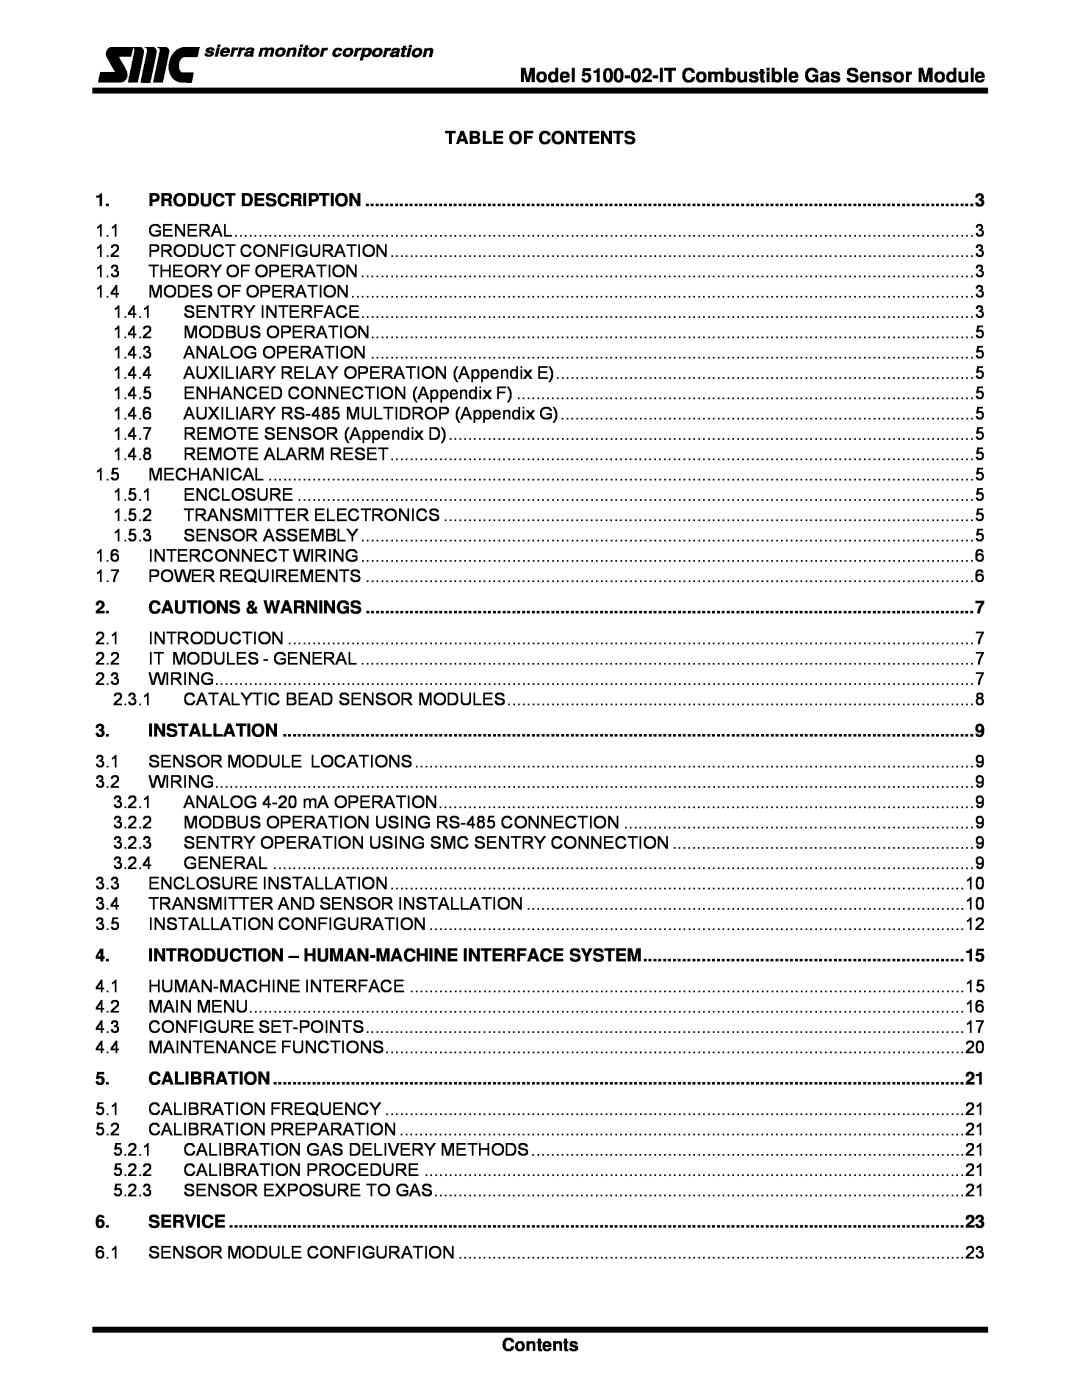 Univex IT Series instruction manual Table Of Contents, Model 5100-02-ITCombustible Gas Sensor Module 